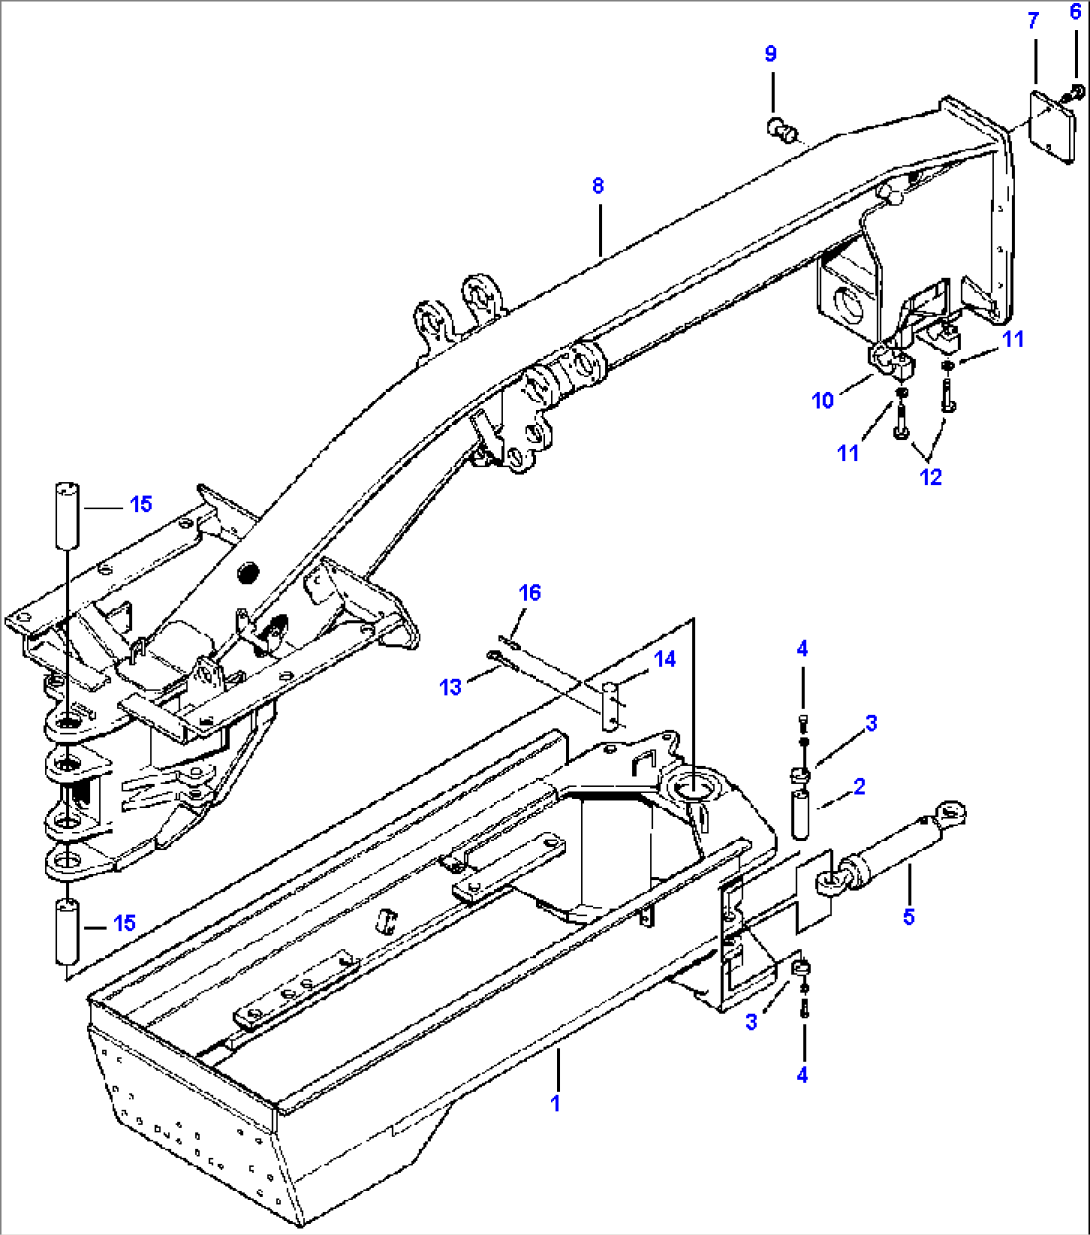 MAIN FRAME 530 2B - R.H. AND L.H. 90 DEGREES BLADE SUSPENSION - S/N 203163-203958